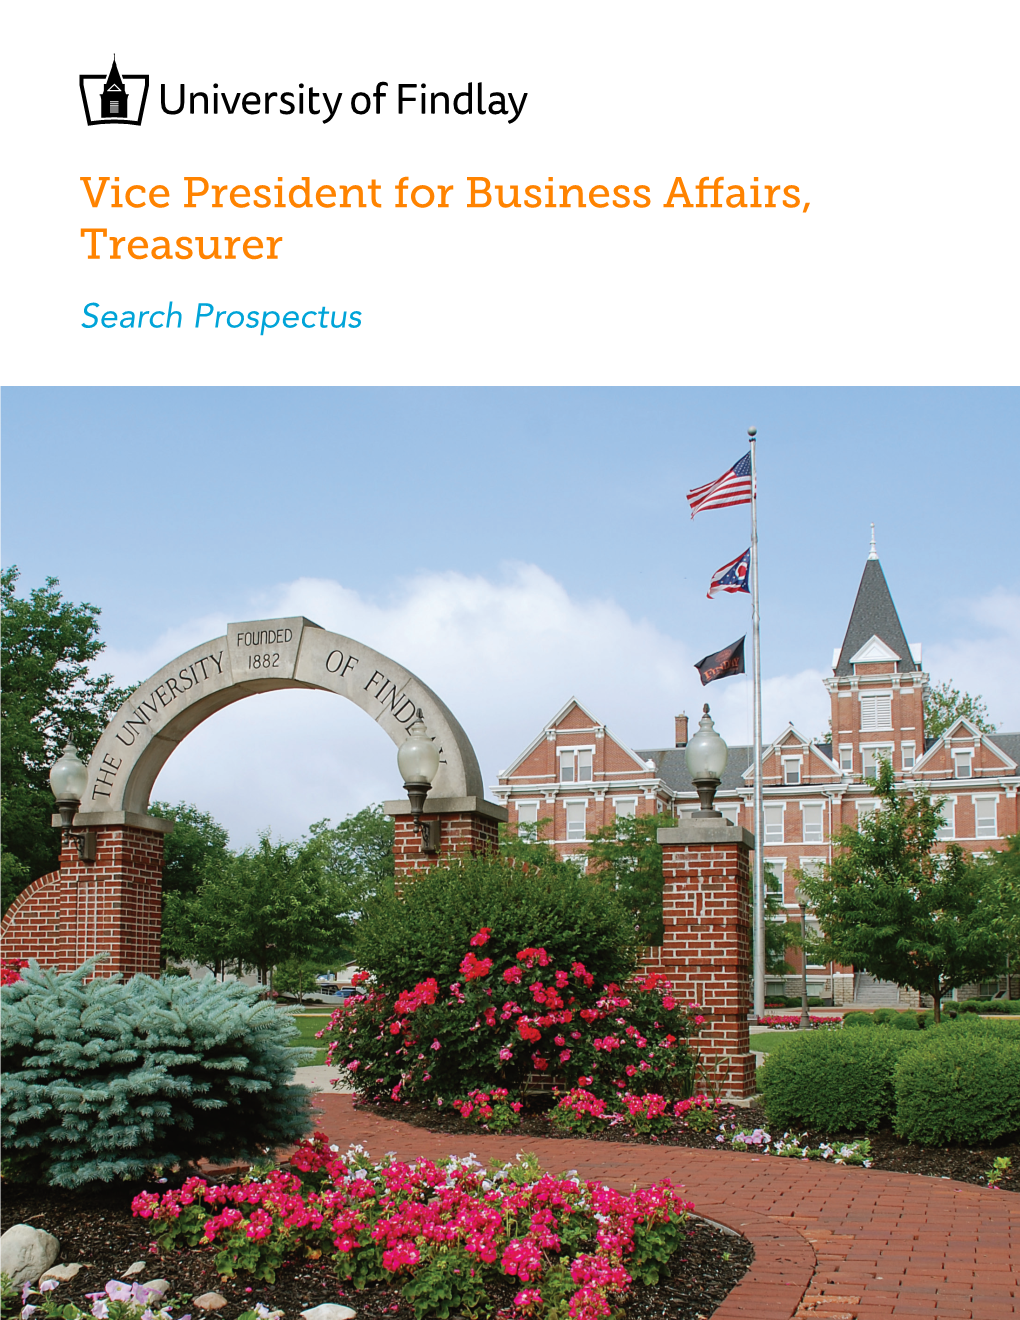 Vice President for Business Affairs, Treasurer Search Prospectus